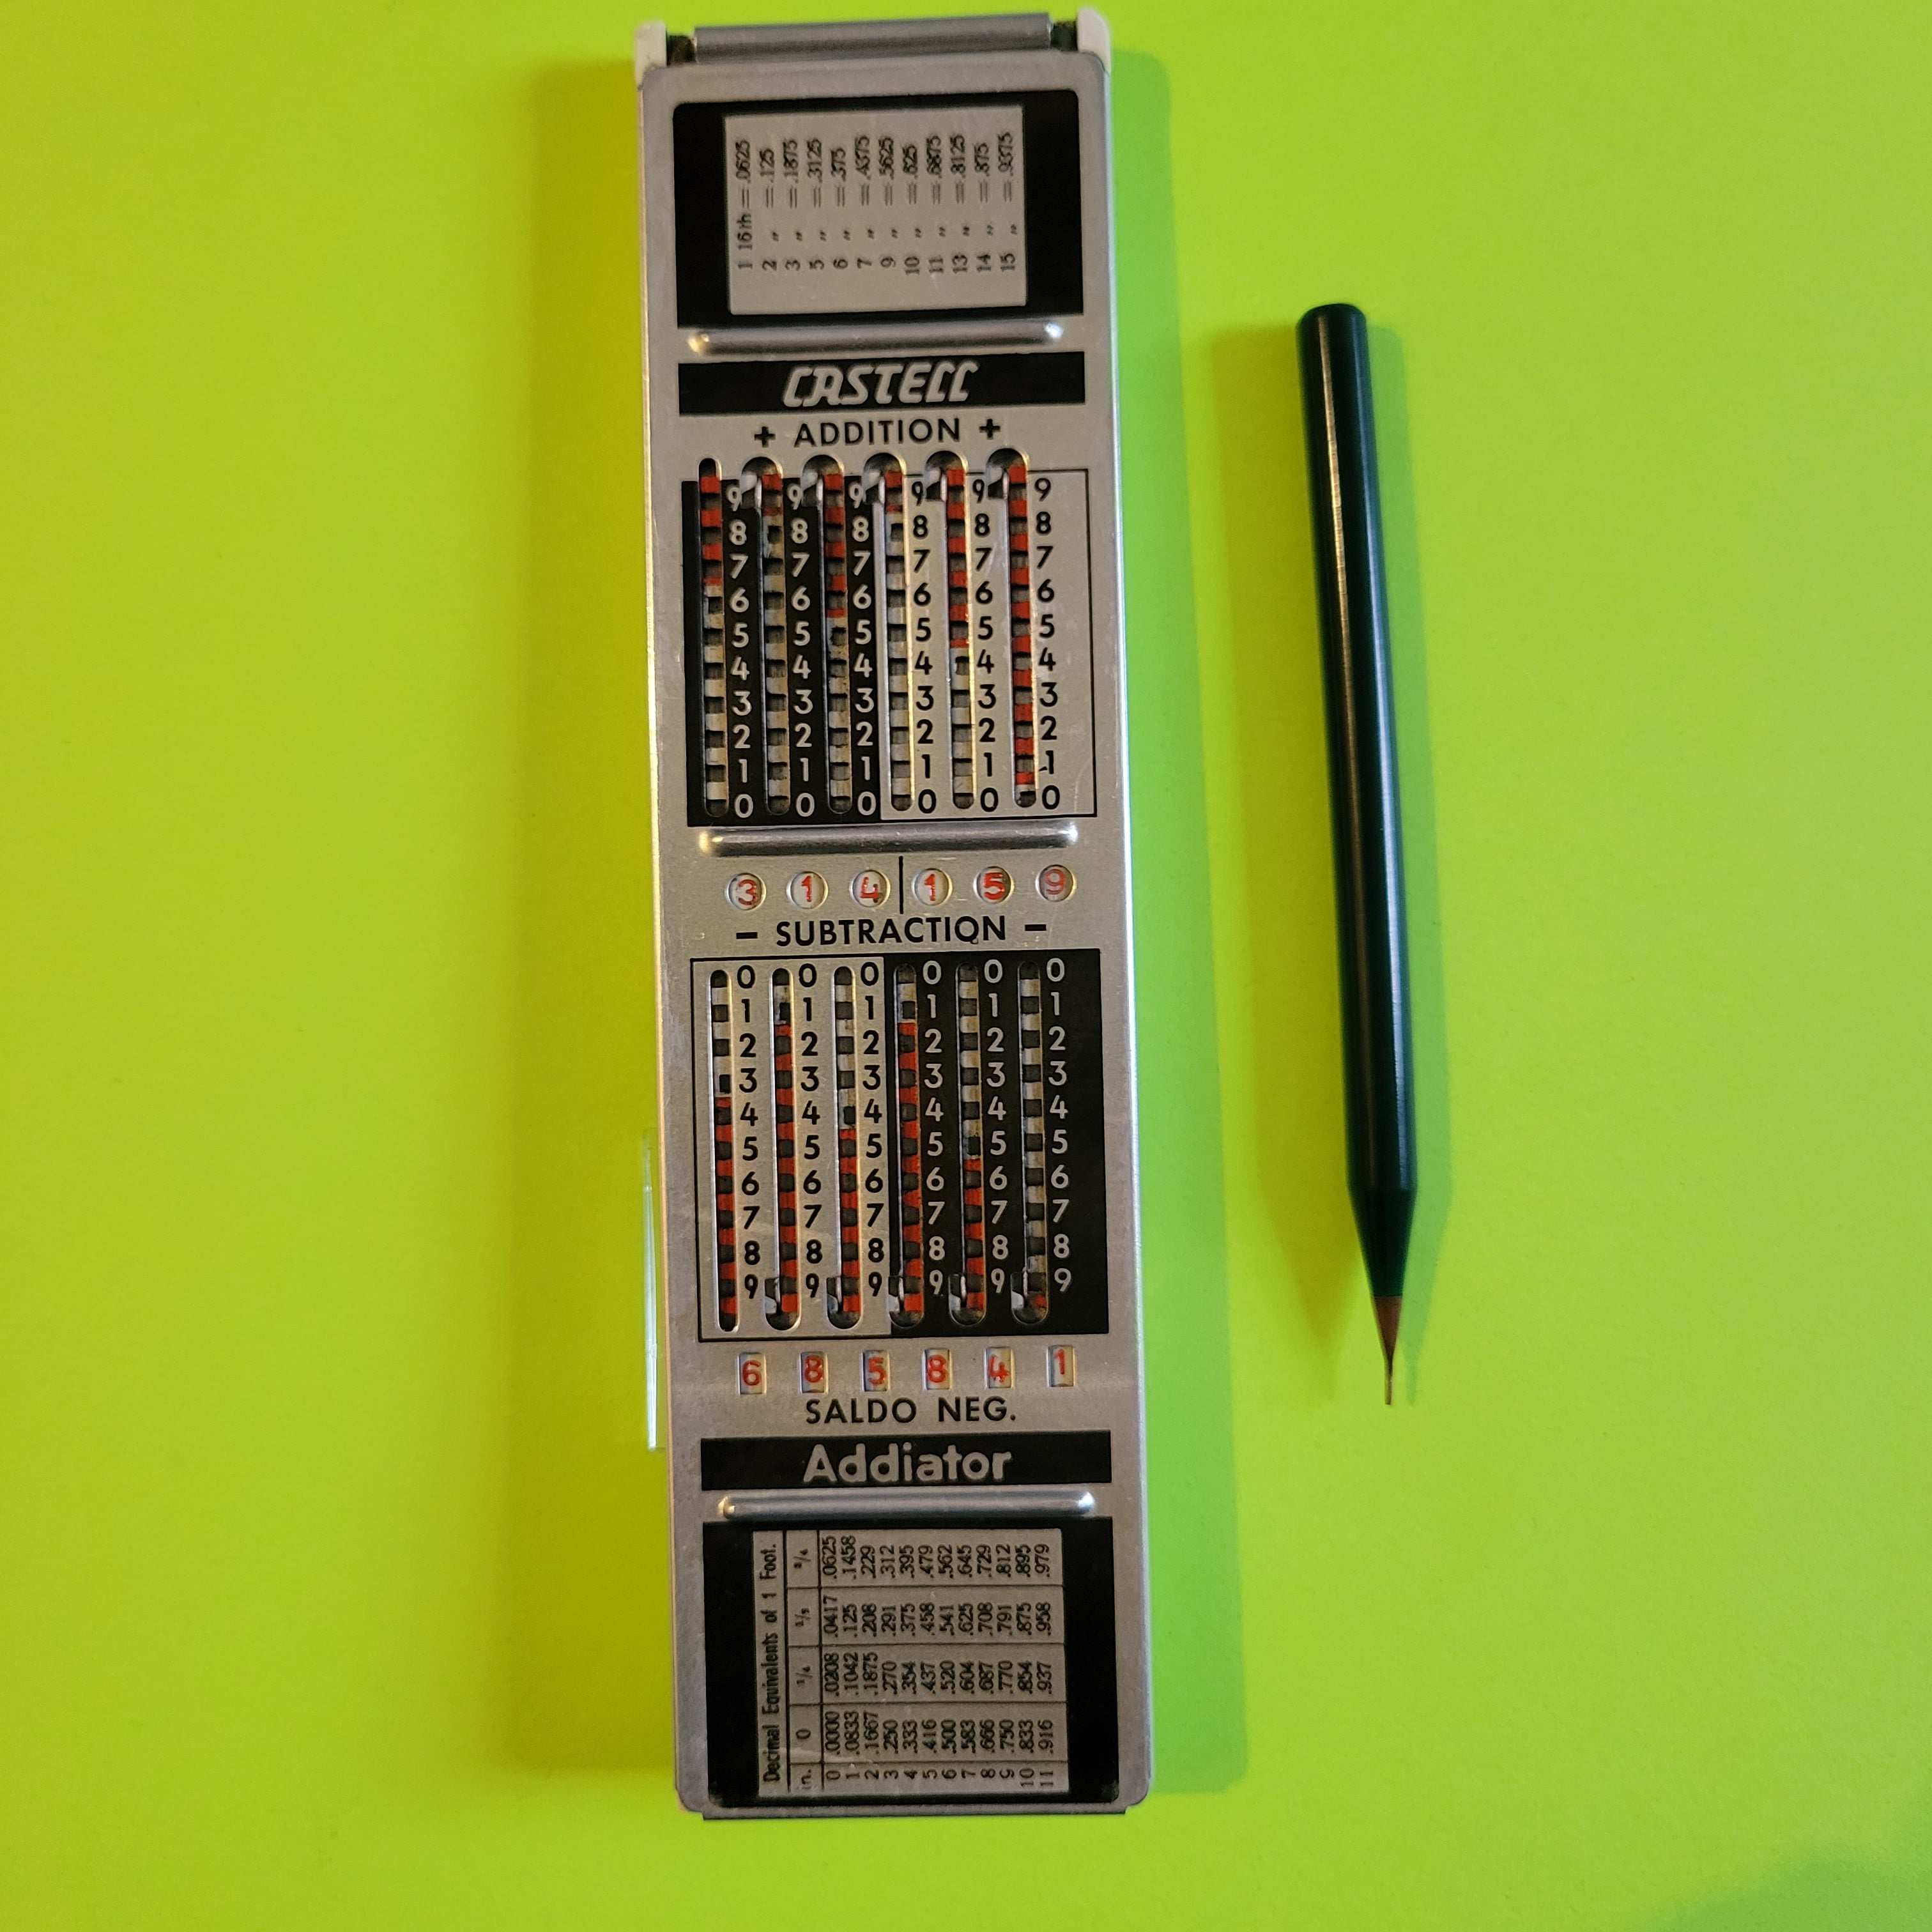 An image of the addiator mechanical calculator on the back of a Faber-Castelle 67/87Rb Rietz slide rule